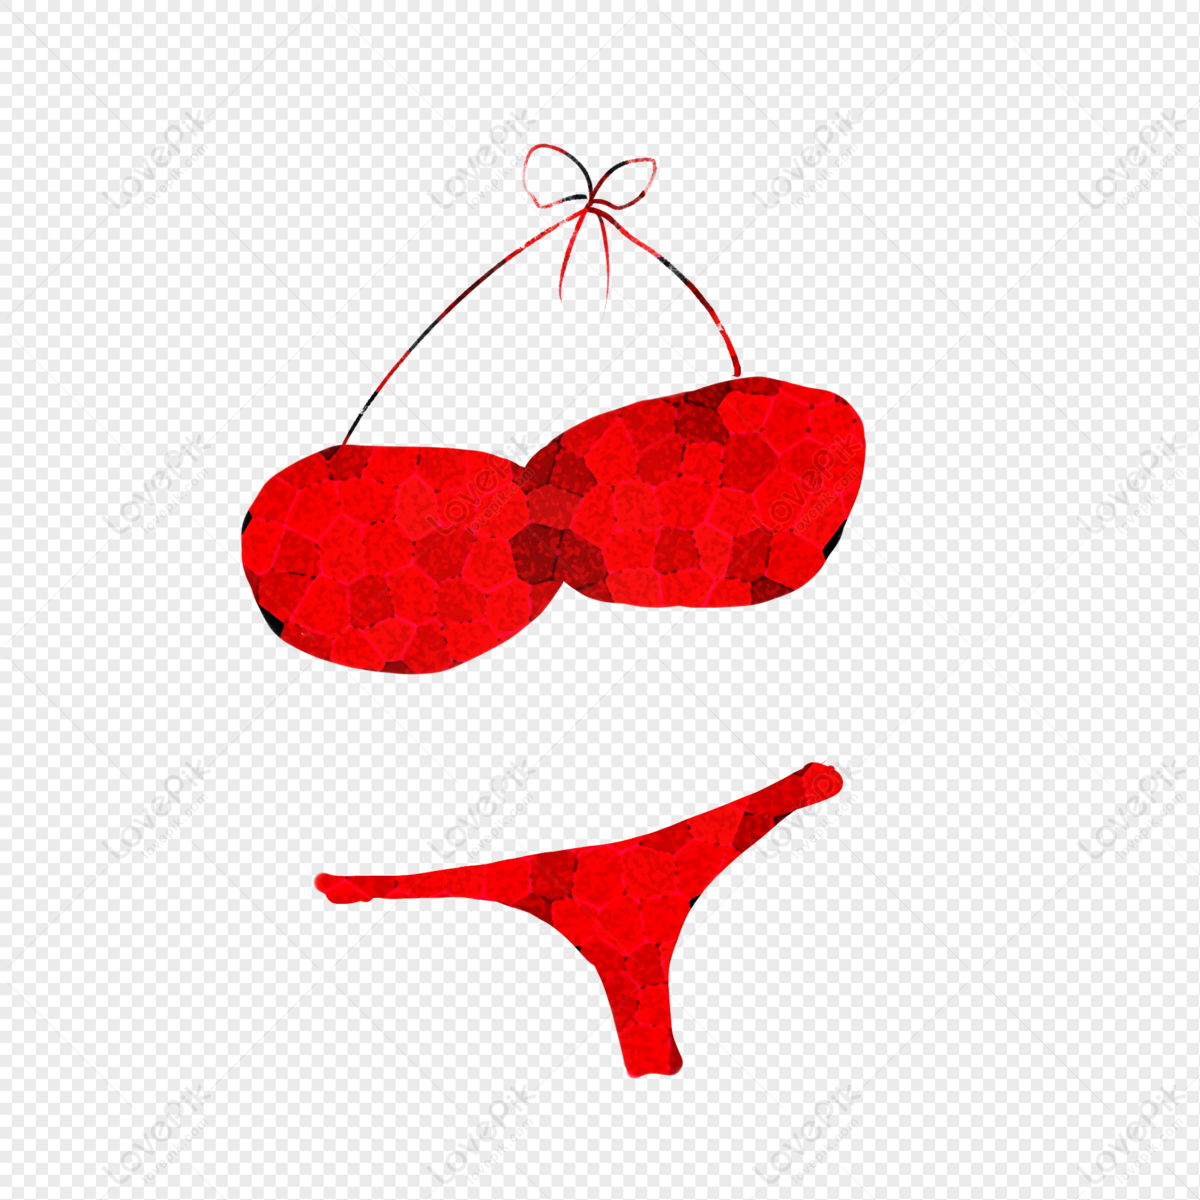 Red Bra PNG Transparent Images Free Download, Vector Files